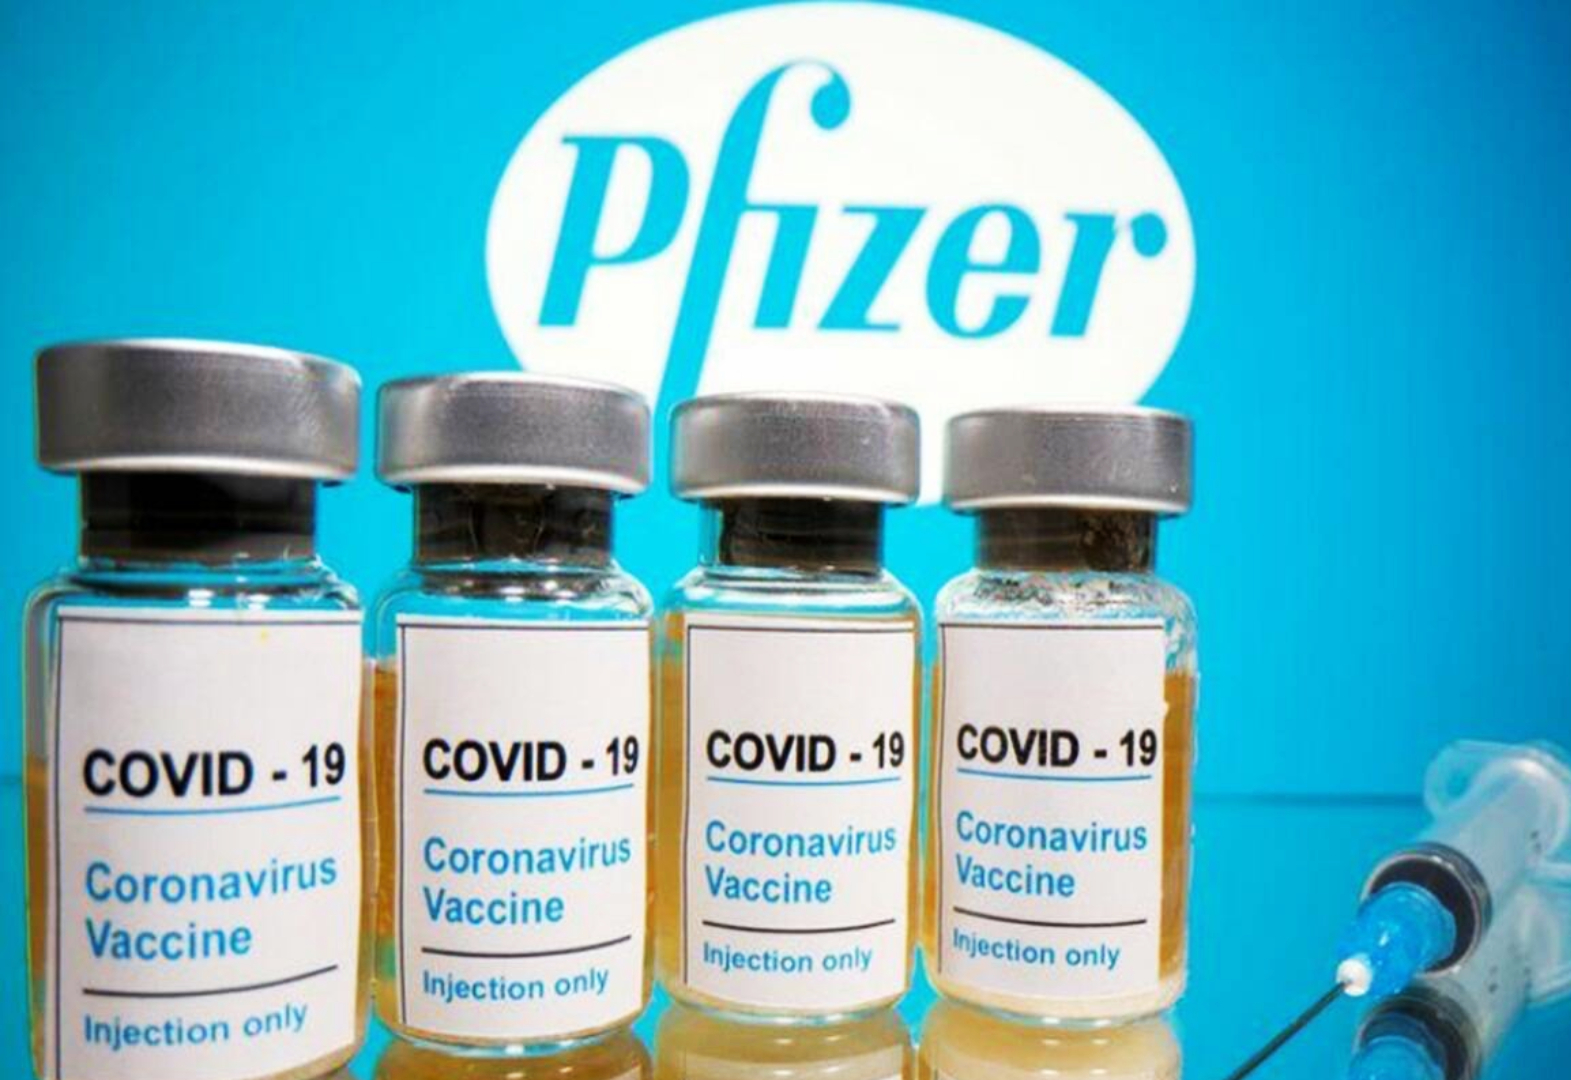 Pfizer Covid-19 Vaccine Could Get UK Approval This Week Before US